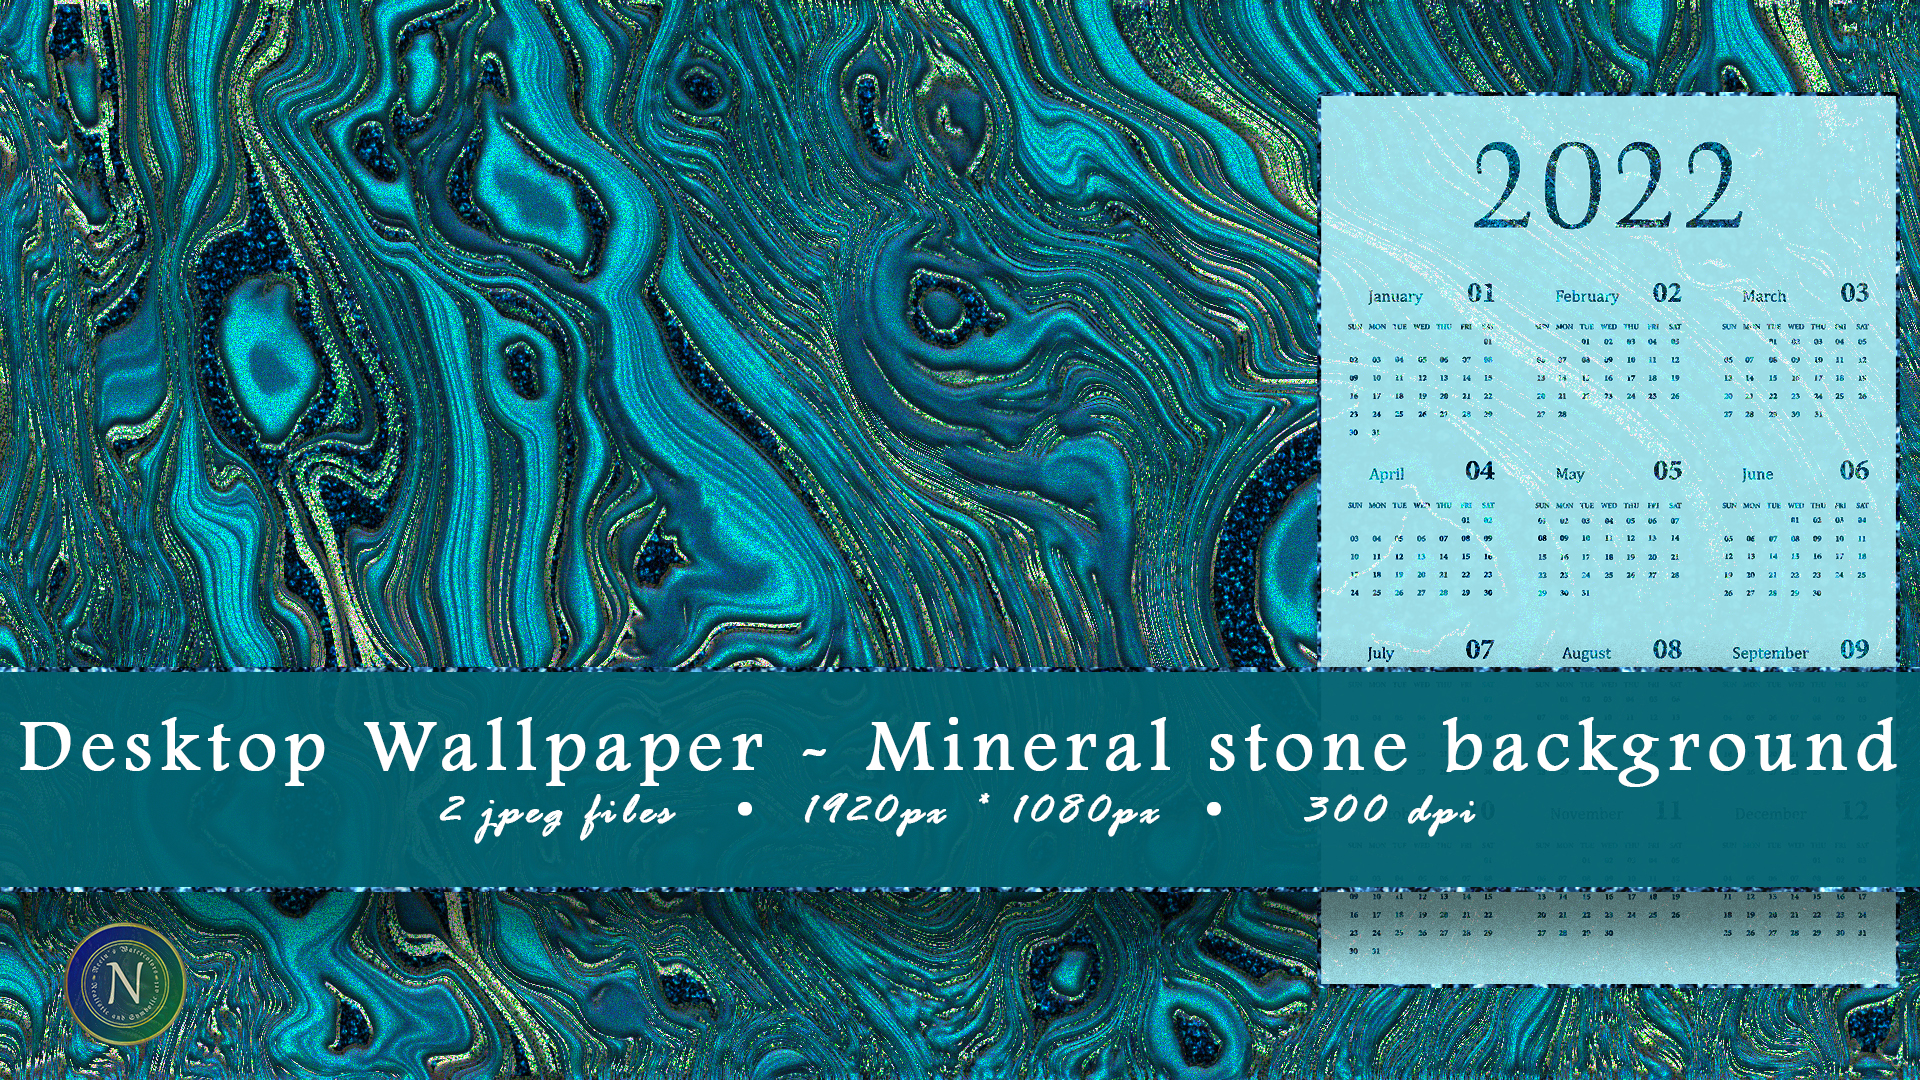 Desktop wallpaper withwithout calendar mineral stone background digital backgrounds greeting cards personal and mercial use â watercolor journal